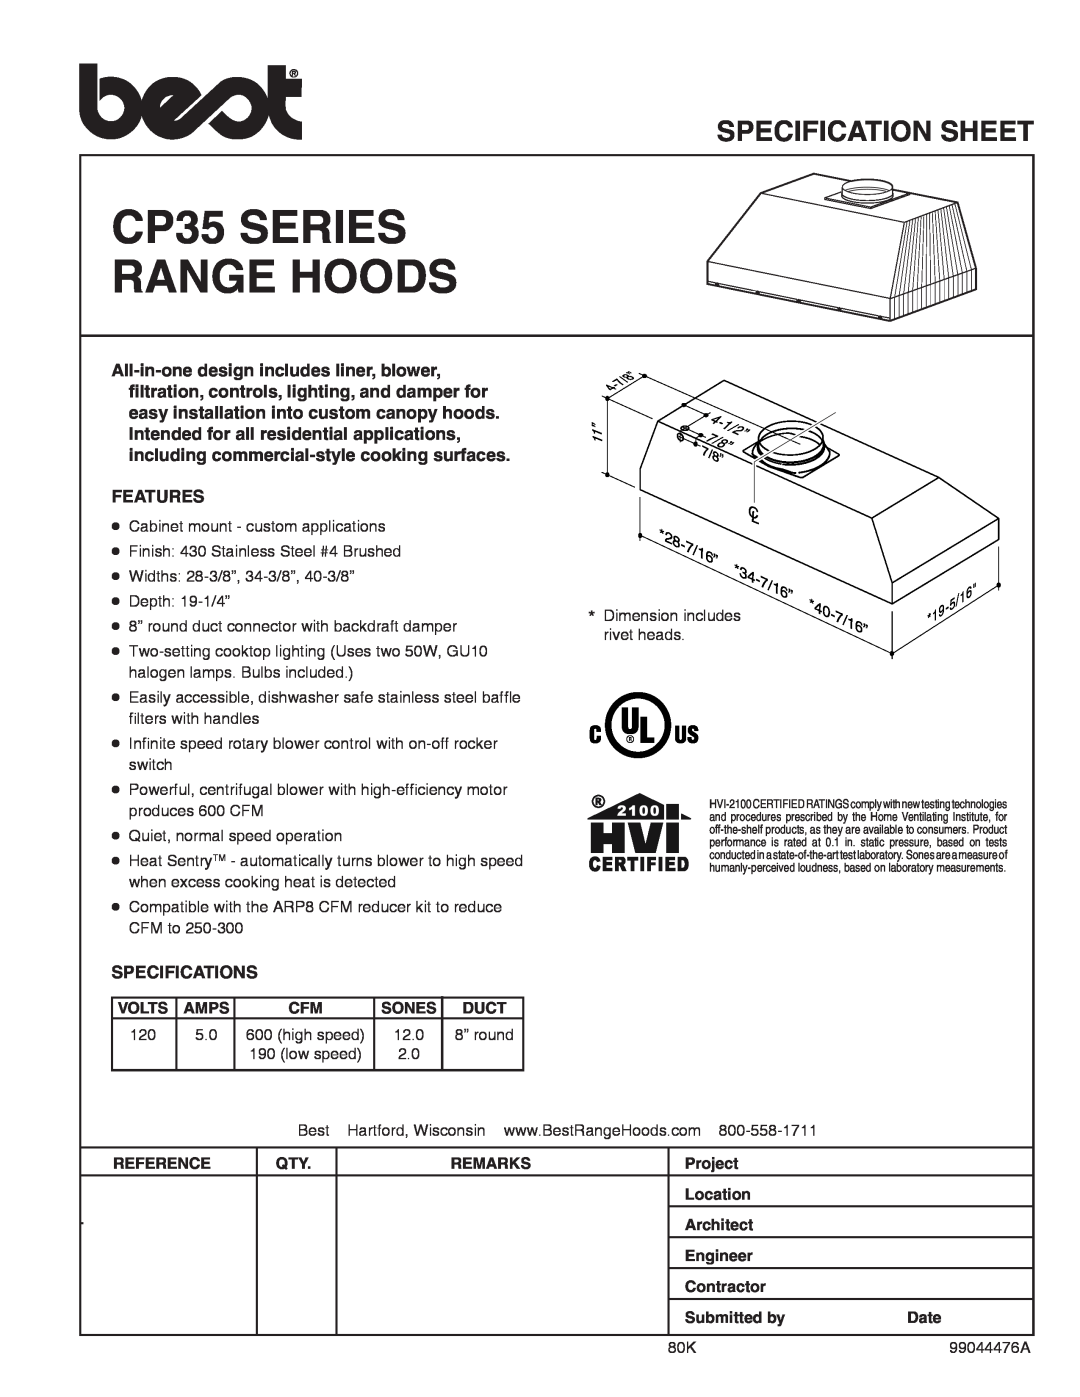 Best CP35 Series specifications CP35 SERIES RANGE HOODS, Specification Sheet, 40-7/16”, Features, Specifications 